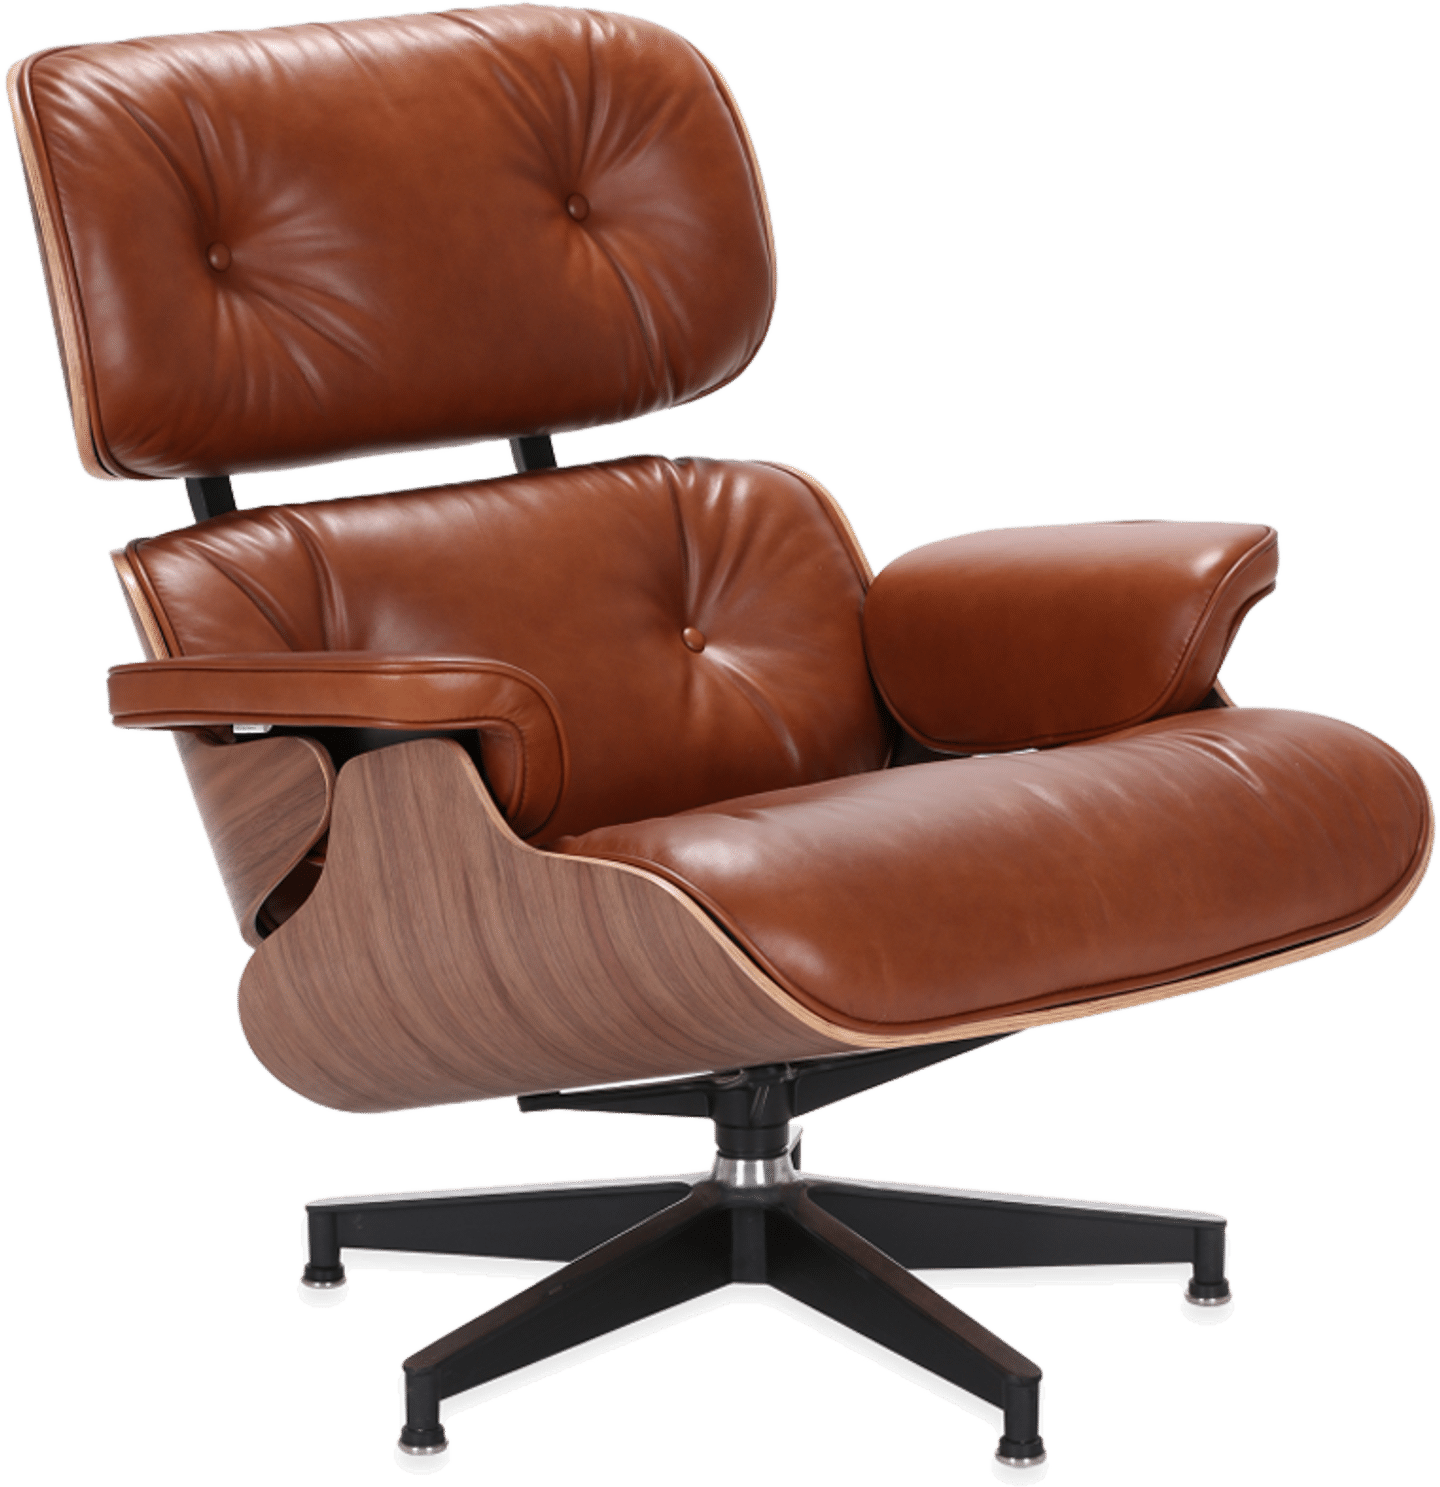 Eames Style Lounge Chair H Miller Version Premium Leather/Tan/Rosewood image.